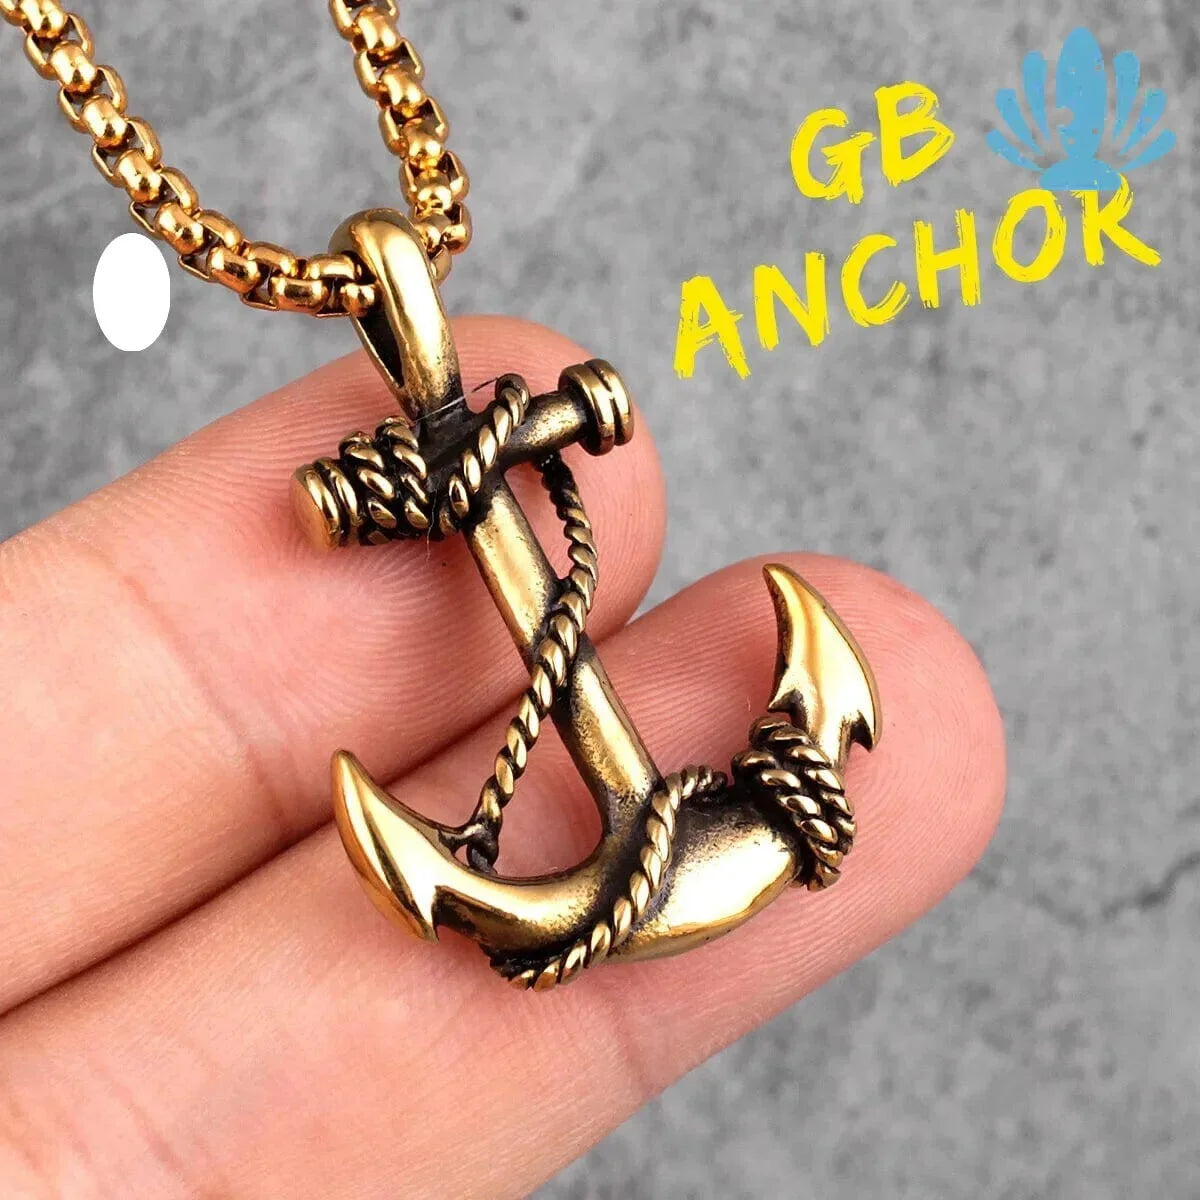 Anchor necklace chain